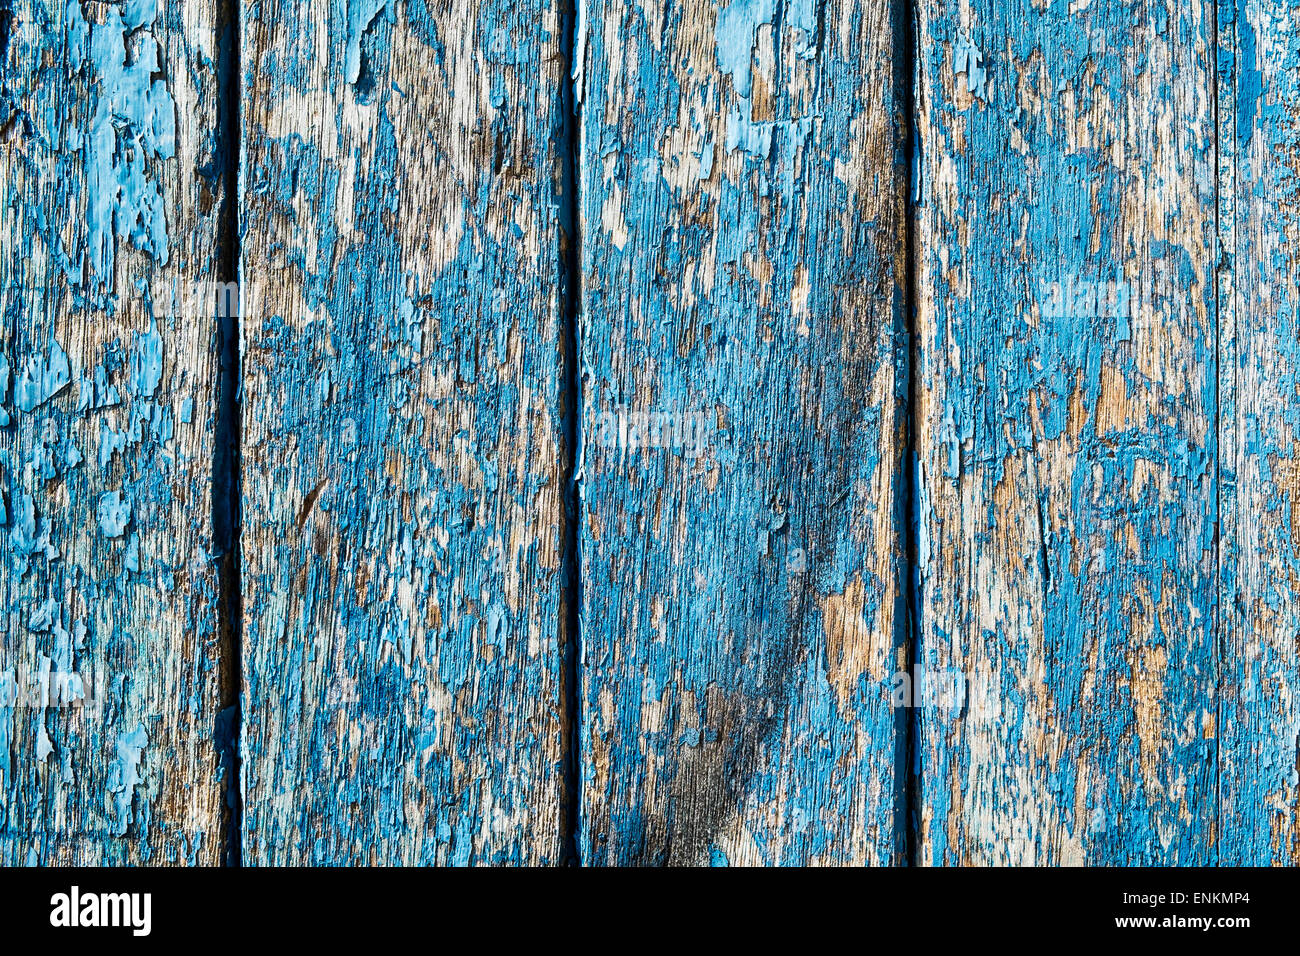 Section of door with peeling blue paint Stock Photo